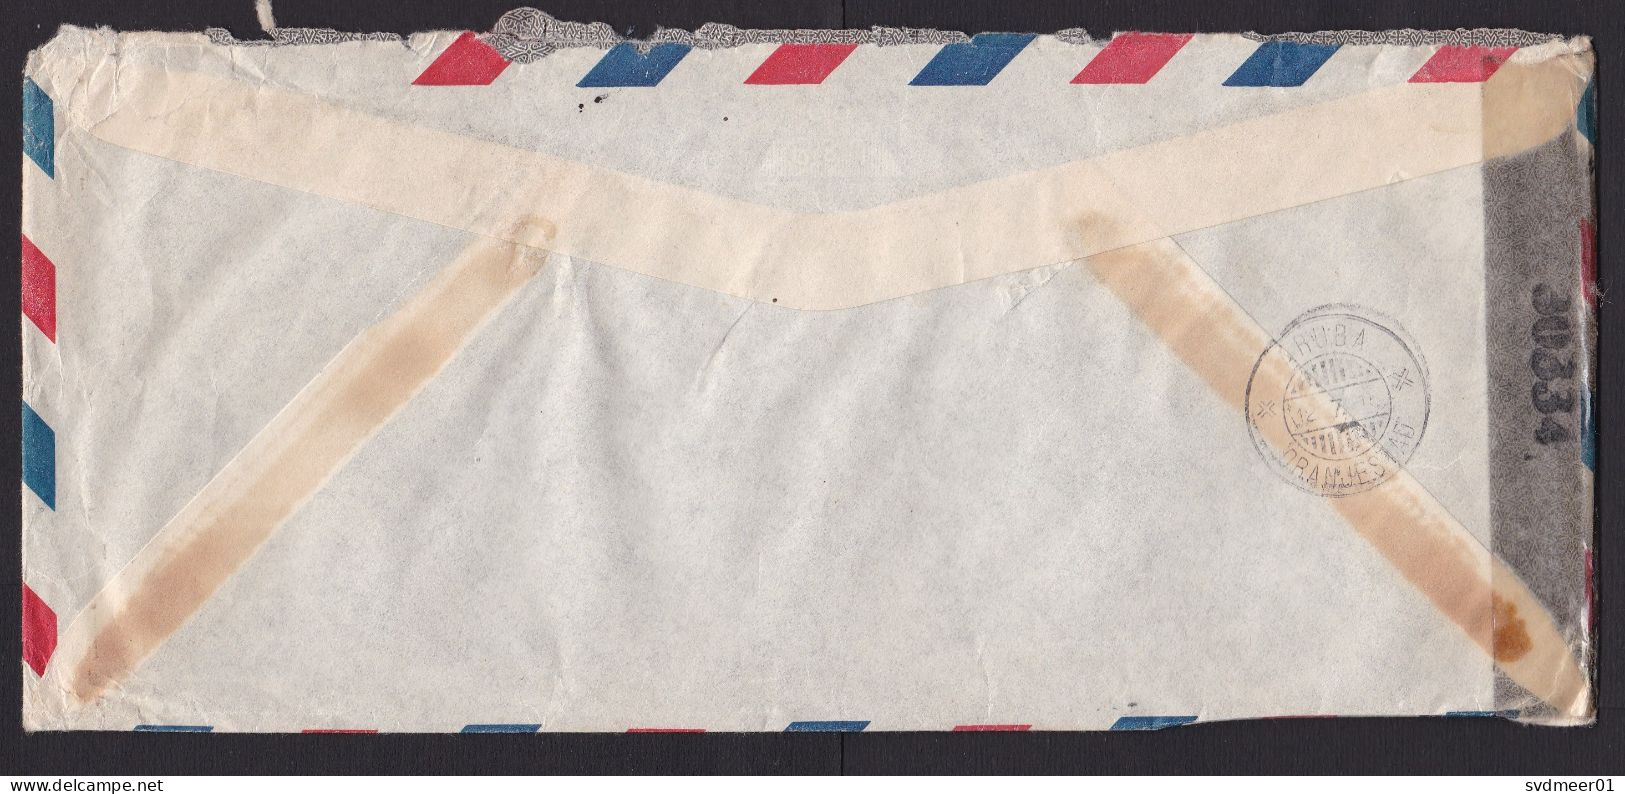 Curacao: Airmail Cover To USA, 1945, 7 Stamps, Map, 2x Censored: US Censor Tape, Aruba Cancel, War, Oil (damaged) - Curacao, Netherlands Antilles, Aruba